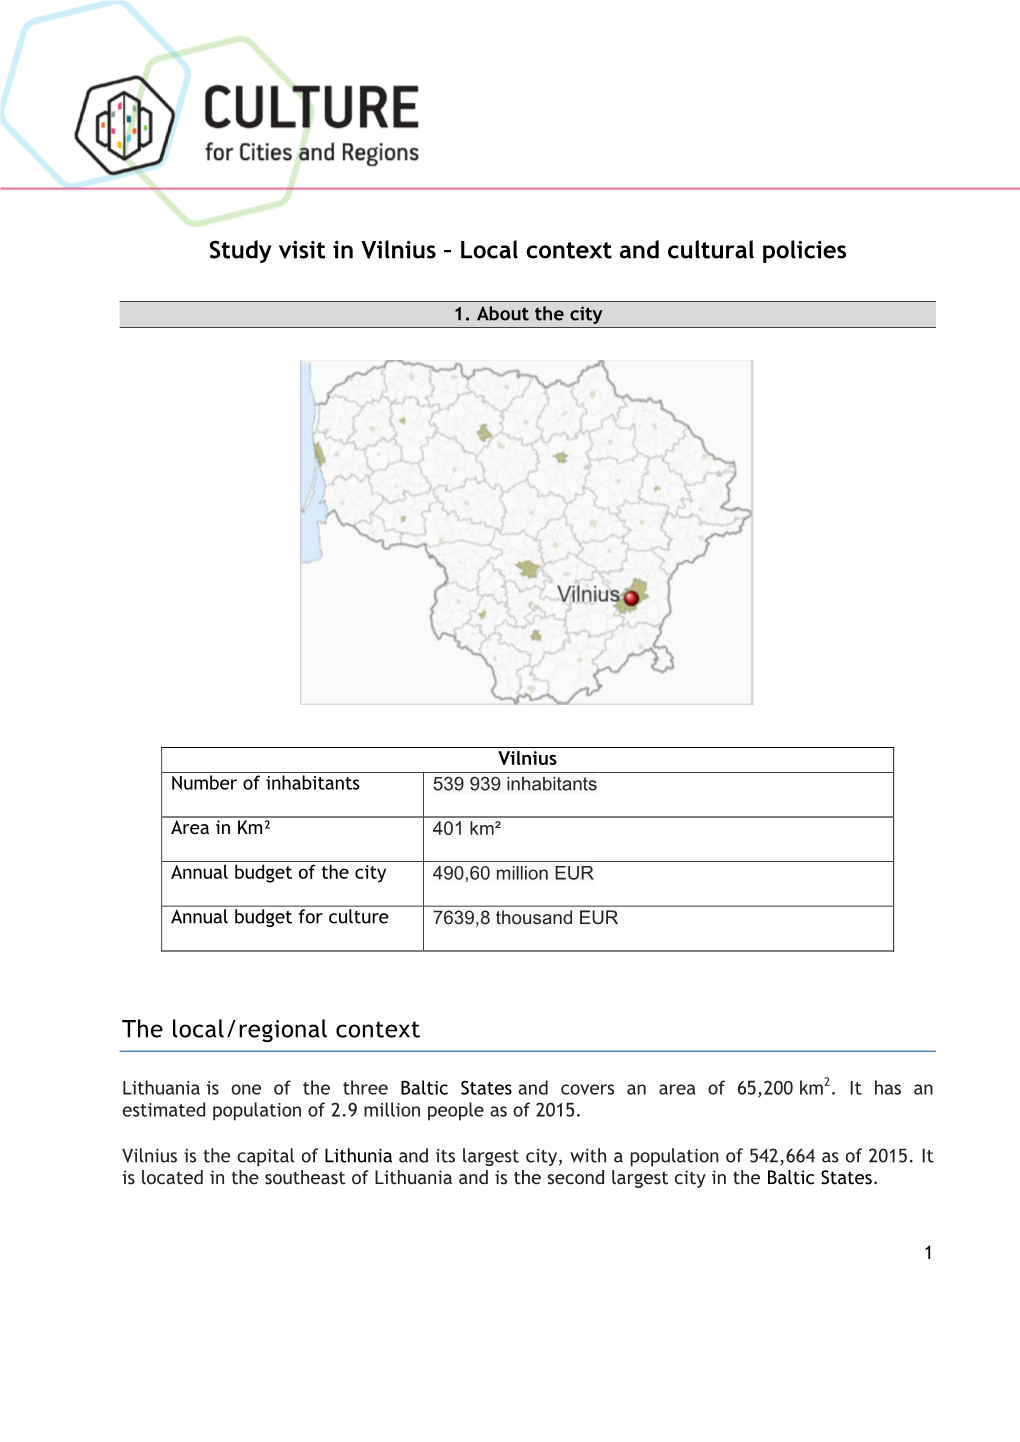 Study Visit in Vilnius – Local Context and Cultural Policies the Local